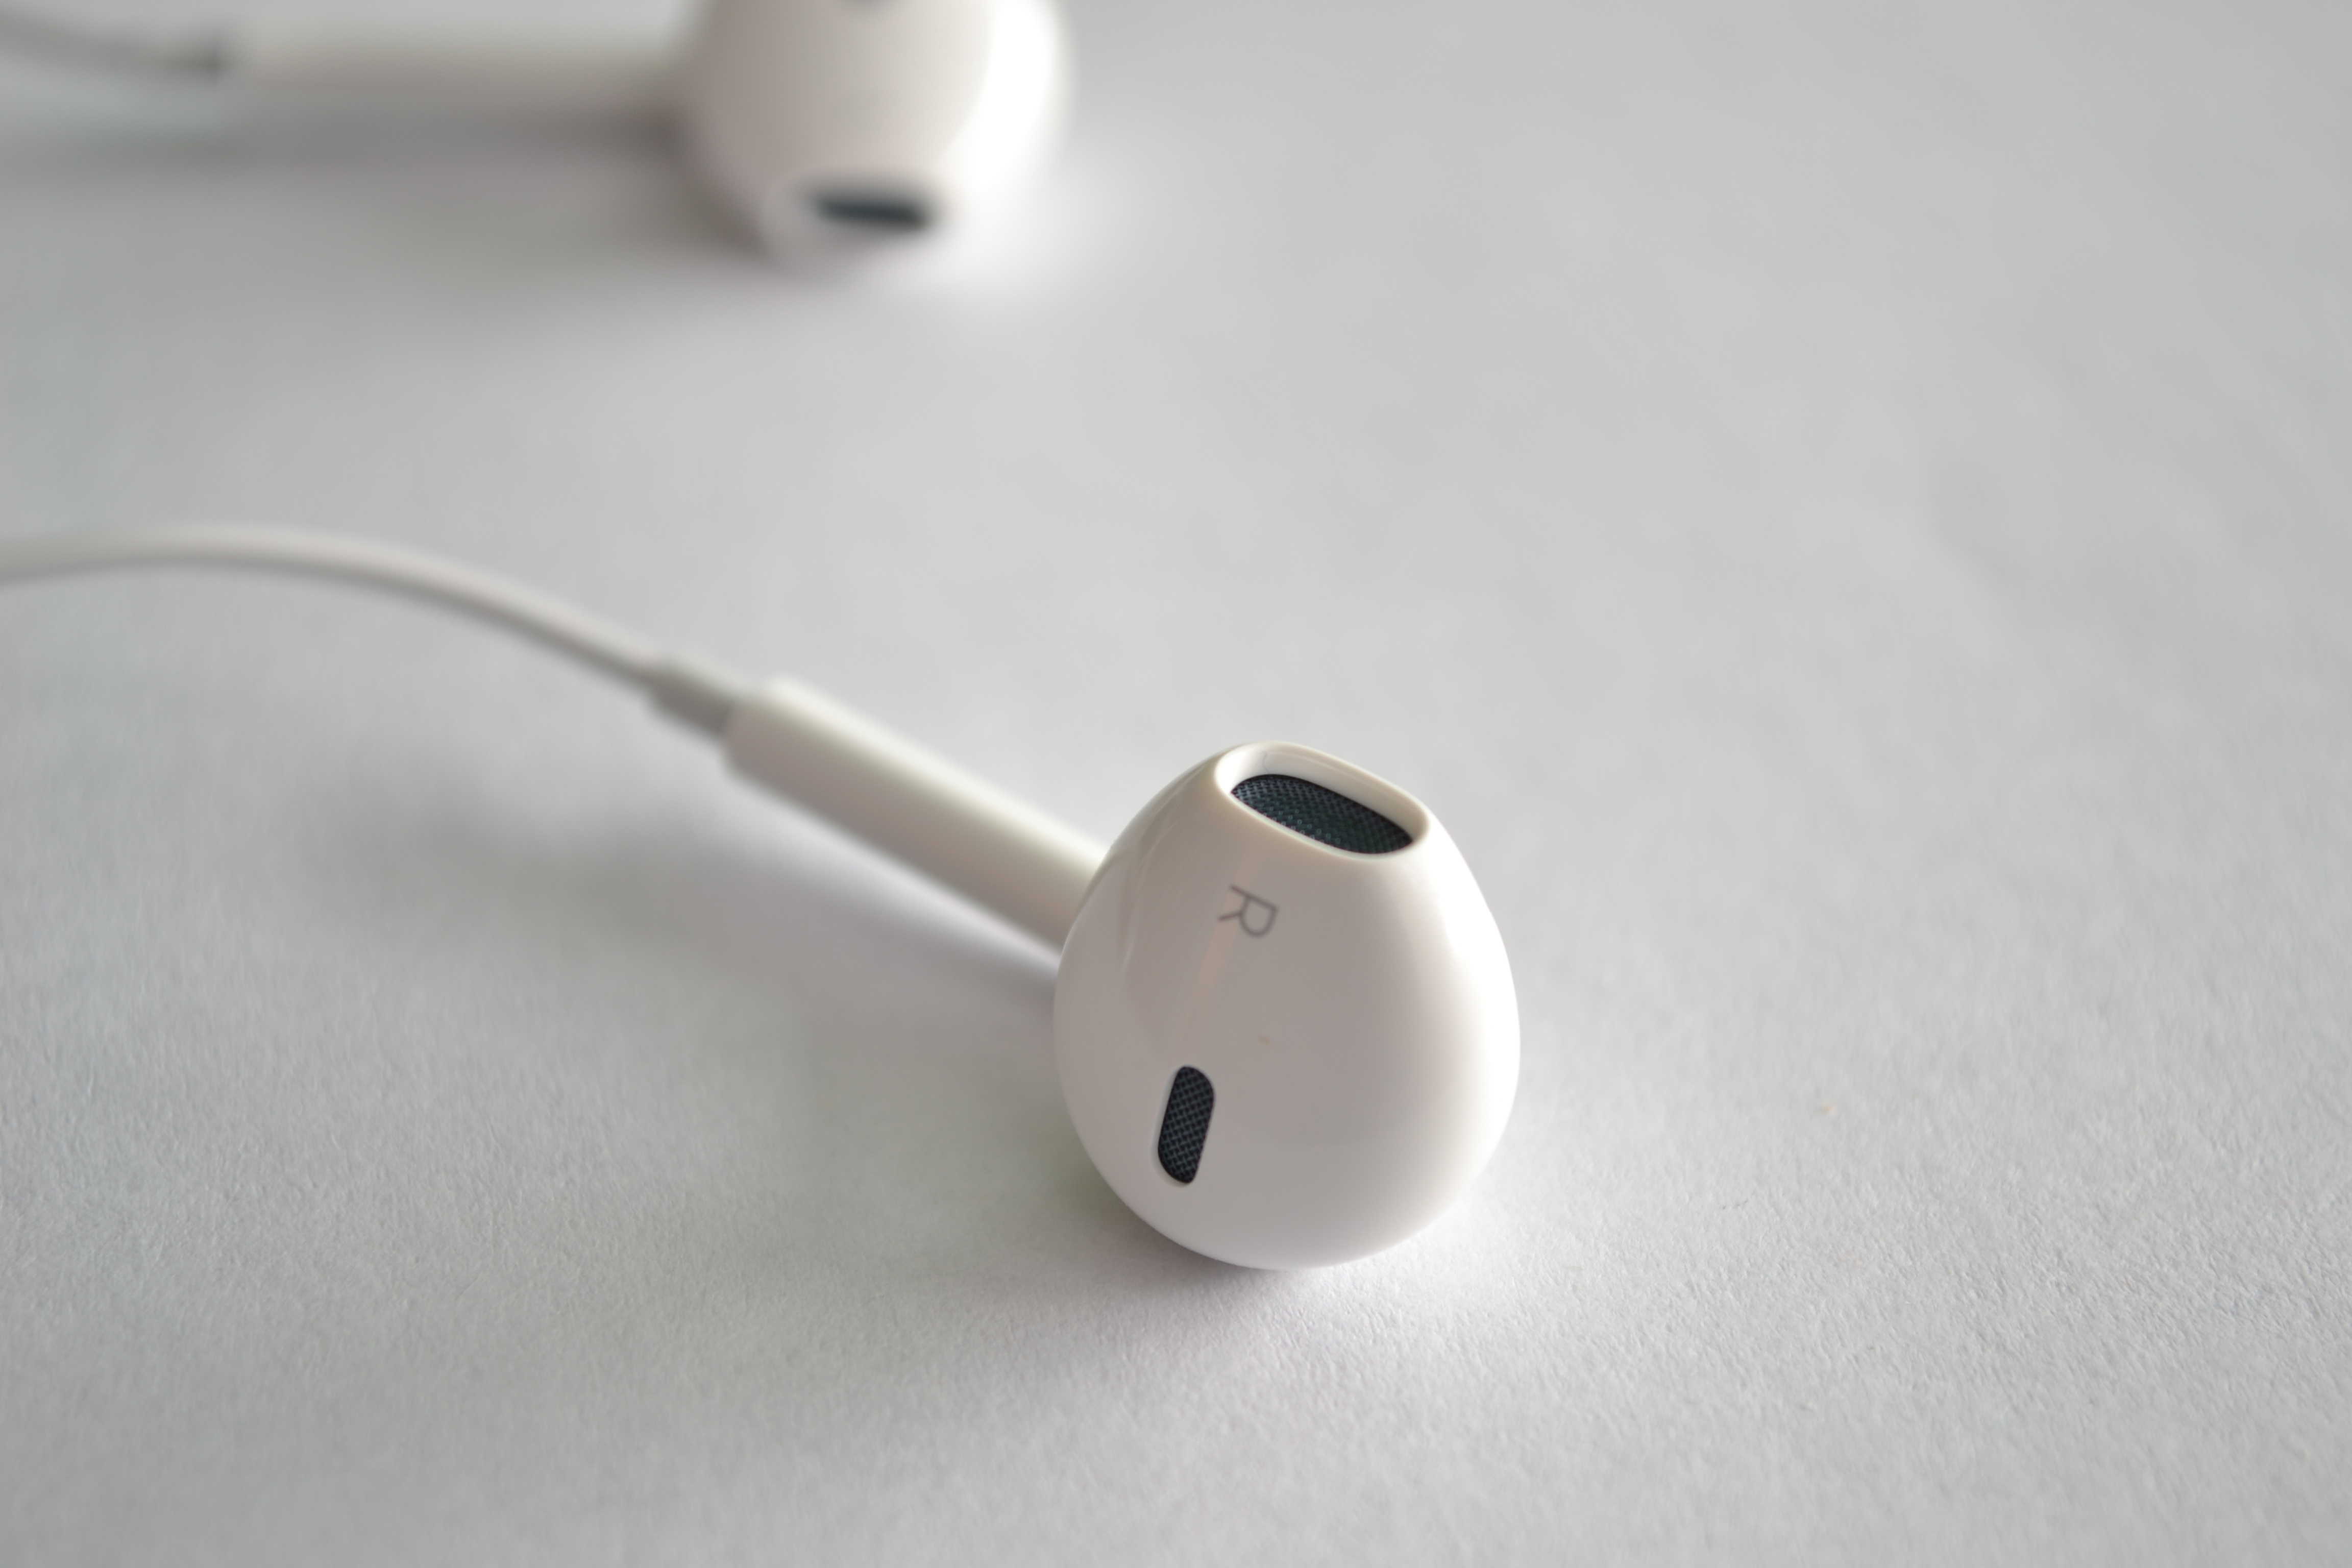 Today in Apple history: Sept. 12, 2012: The iPhone 5 launch brought Apple's new EarPods, with big improvements over previous versions.